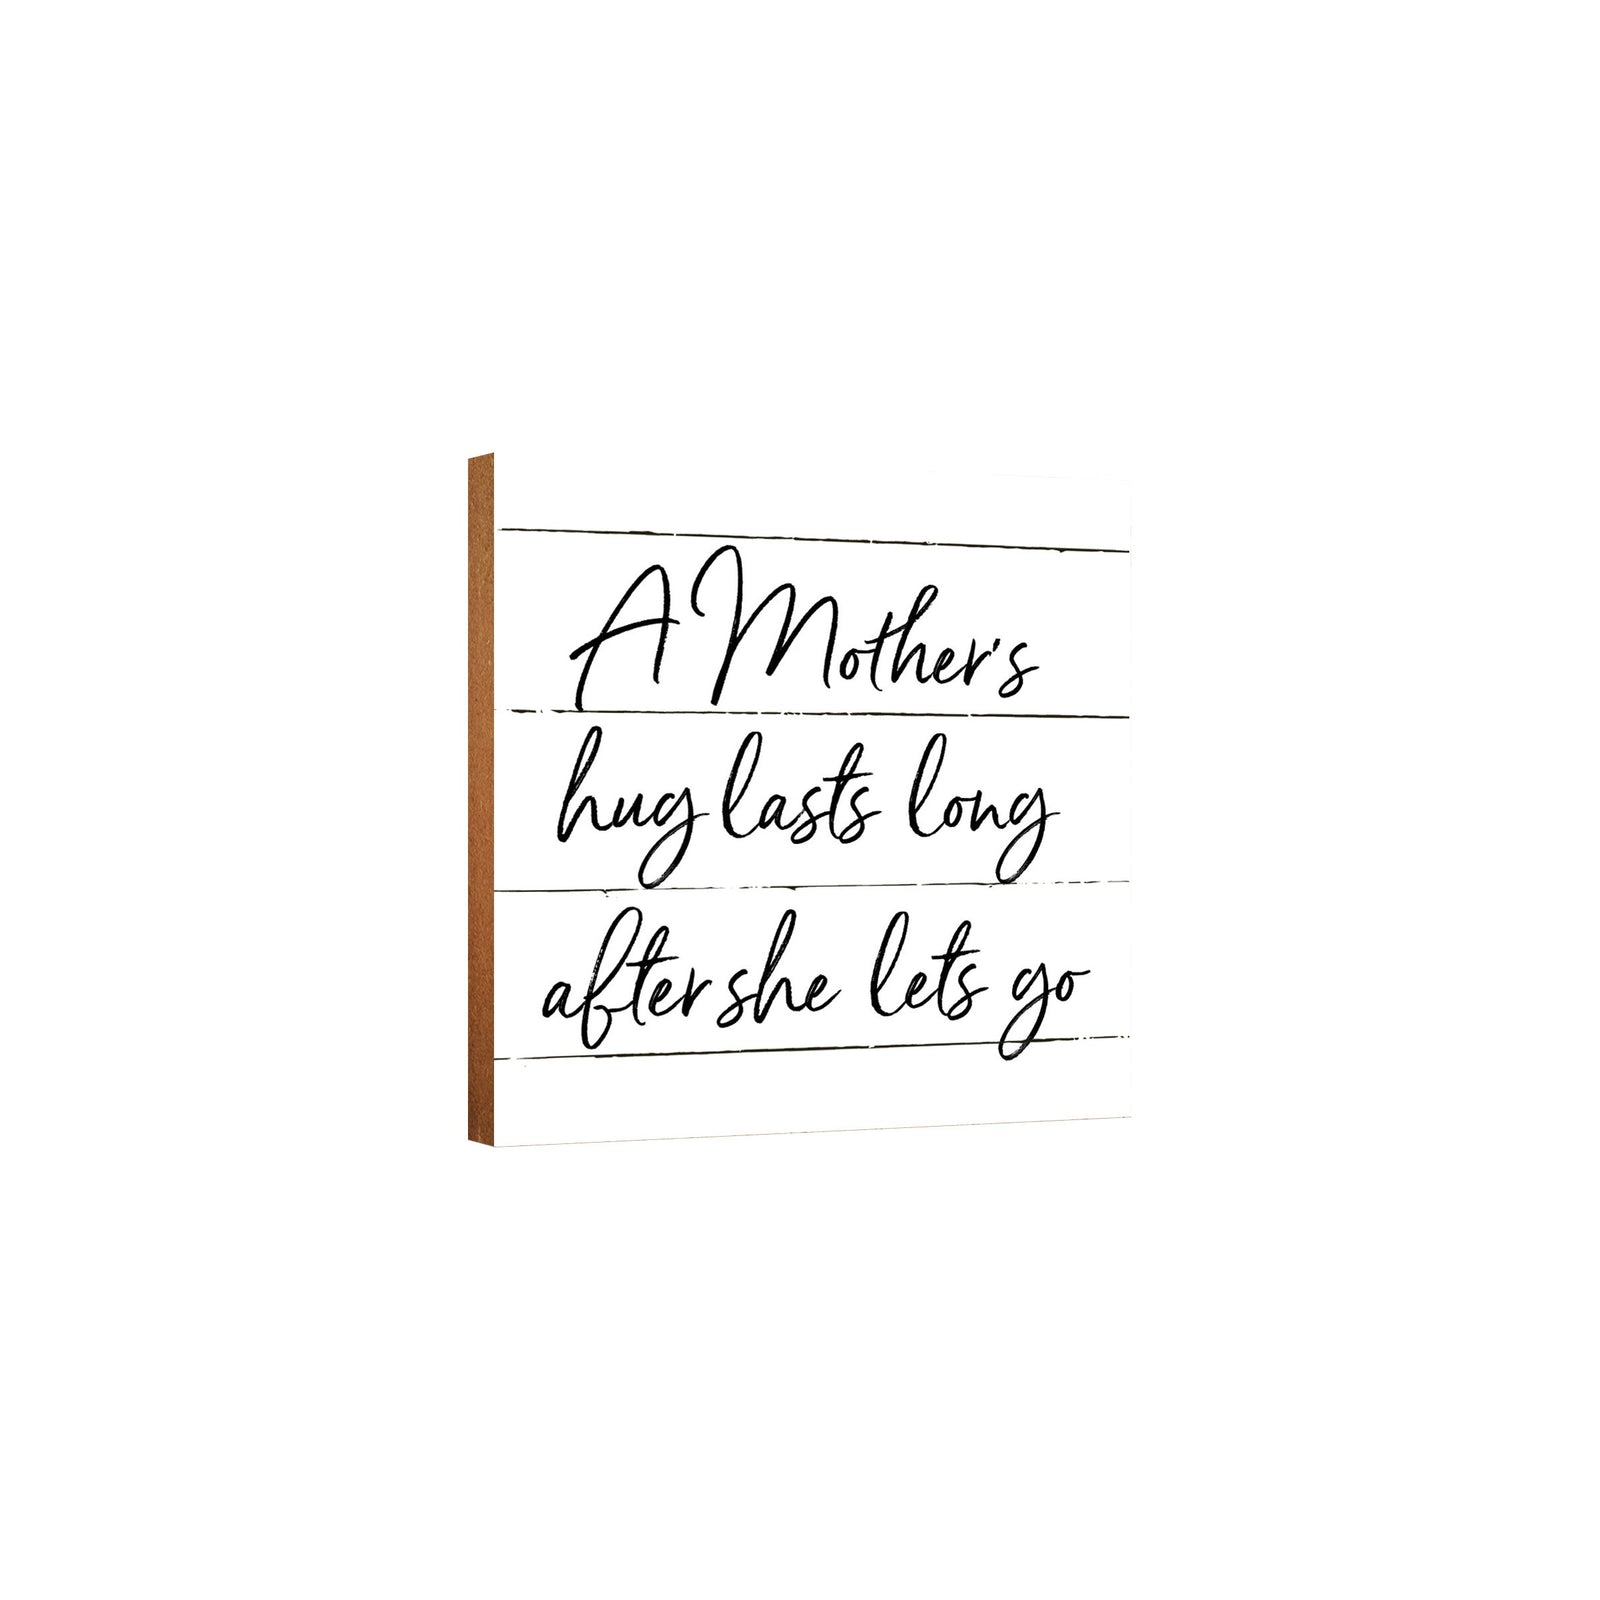 LifeSong Milestones Wooden Shelf Decor and Tabletop Signs Gift for Mother’s Day